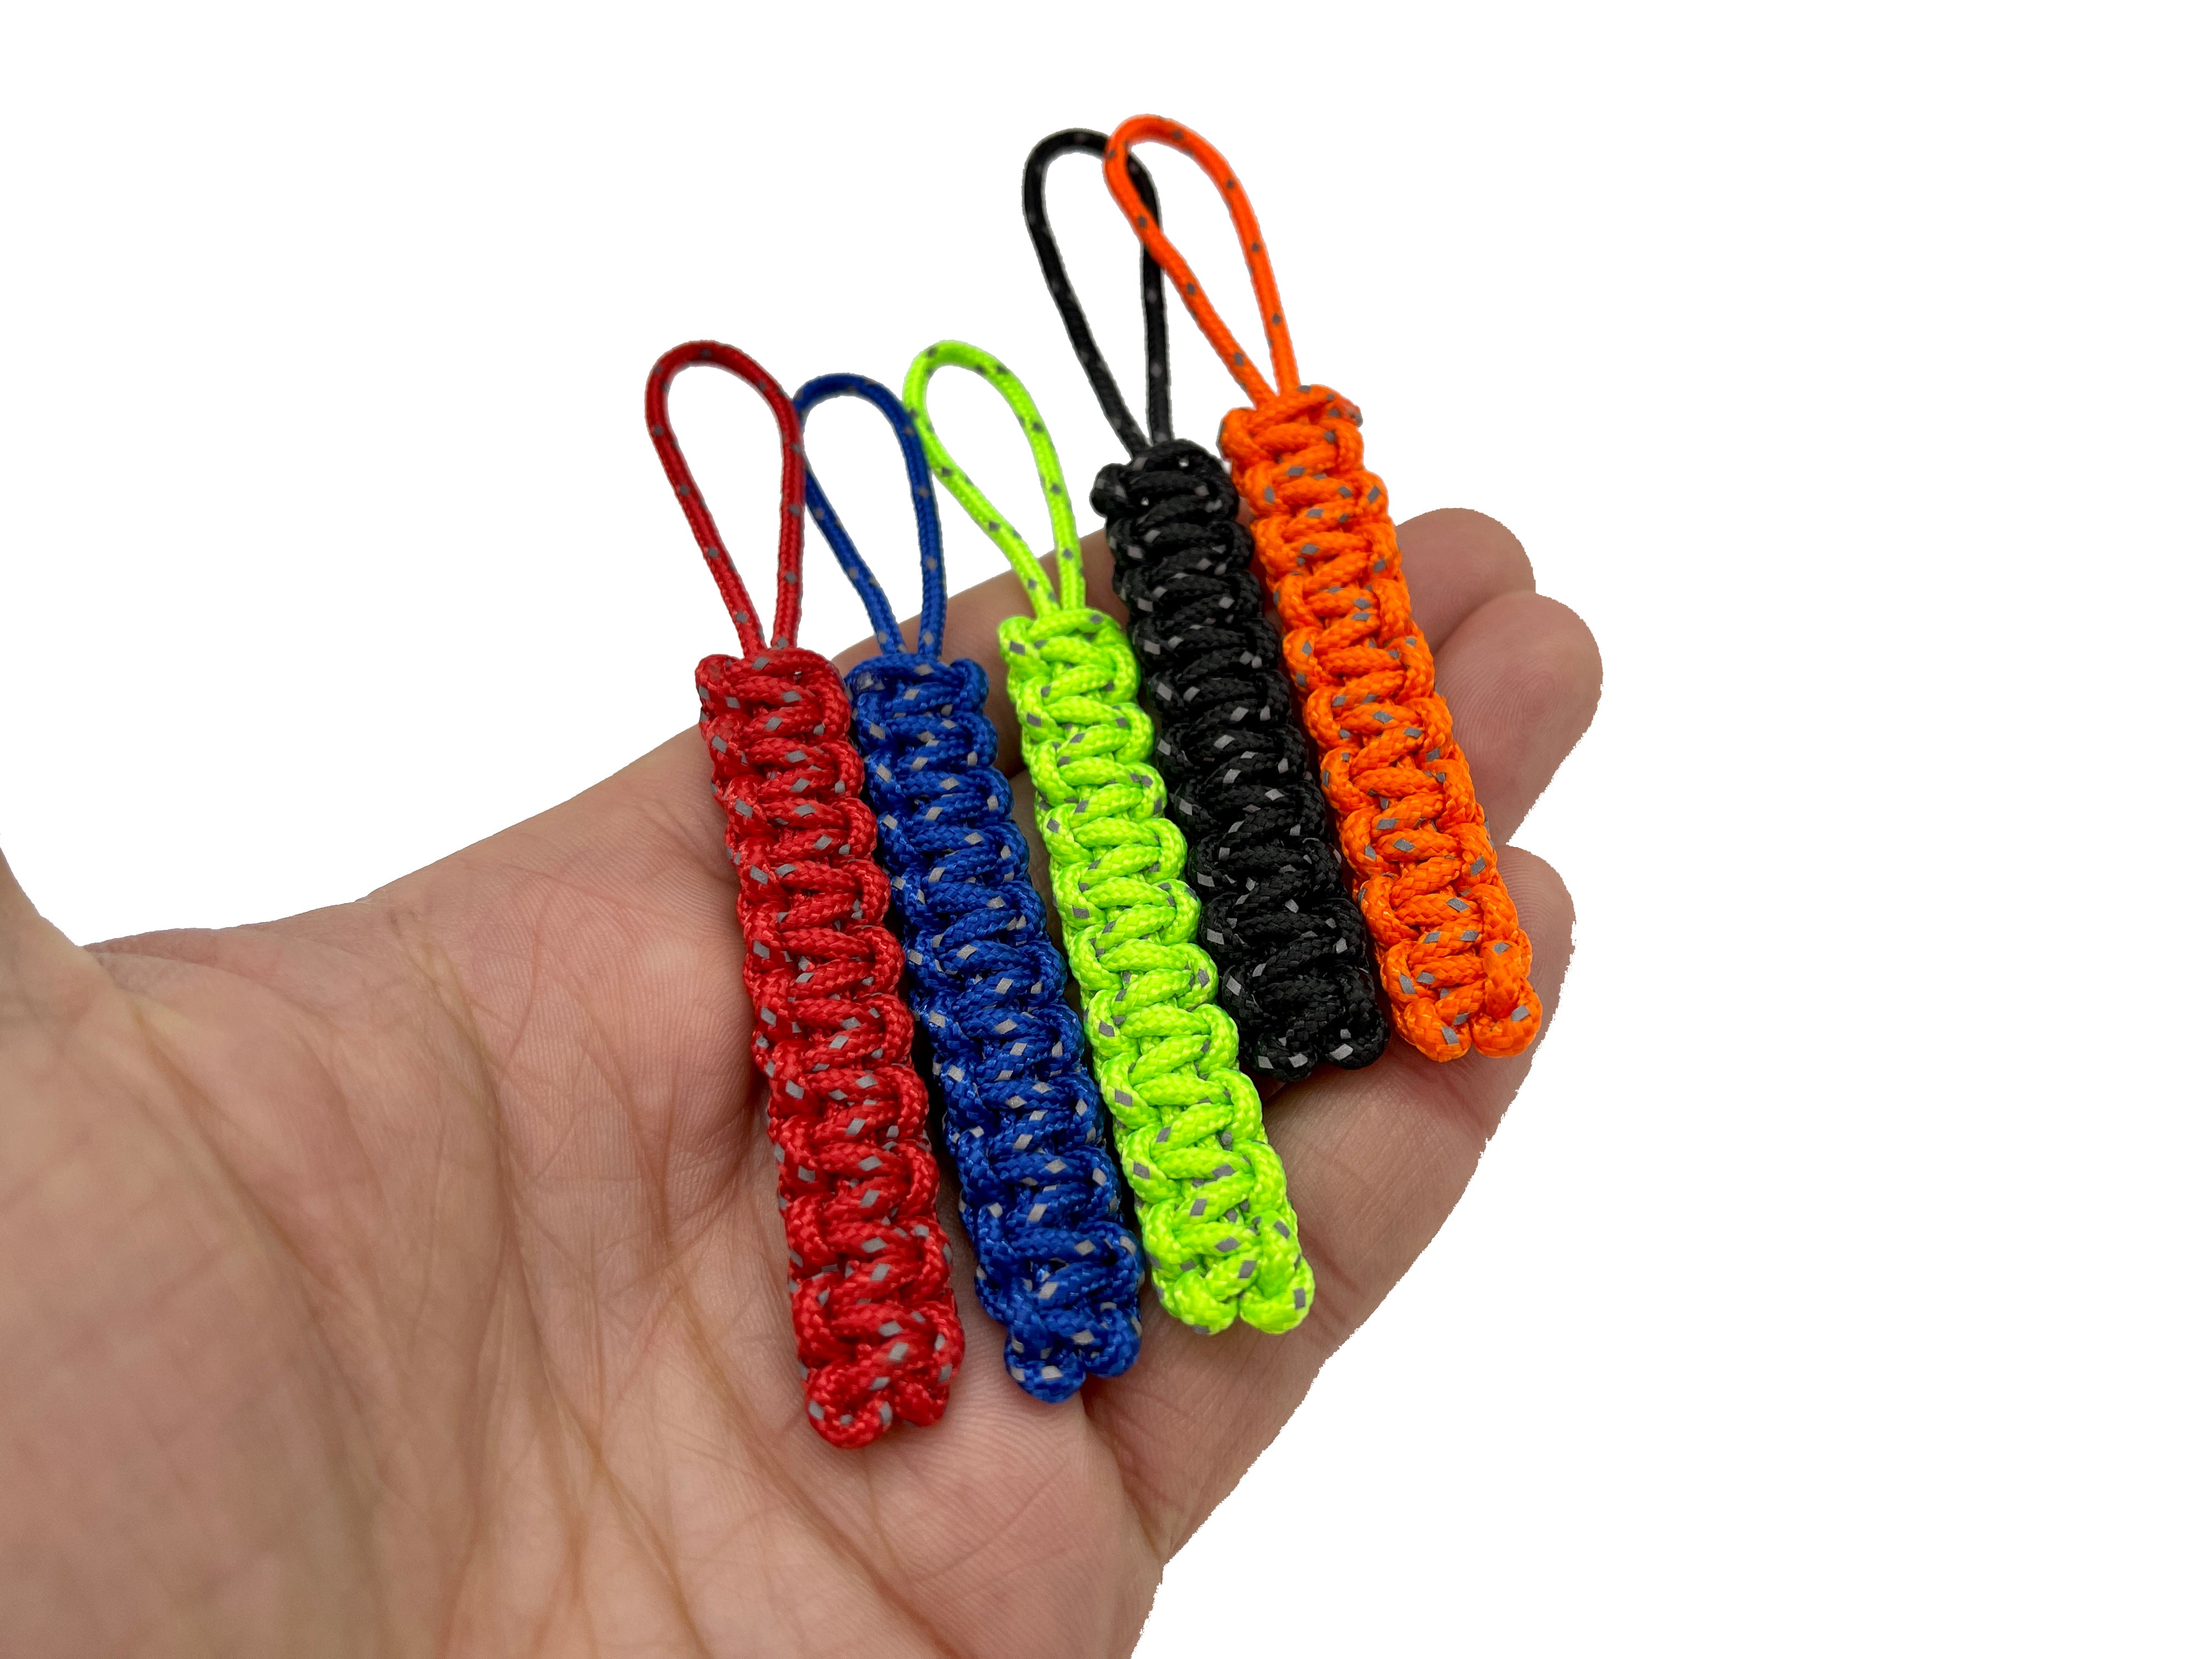 camelcamelcamel - 10 Pieces Zipper Pull Replacement Dress Zipper Pull Helper  Hand Woven Vajra Knot Paracord Pull Tab Extender for Backpacks Jackets  Luggage Purses Handbags (Mutil Color)